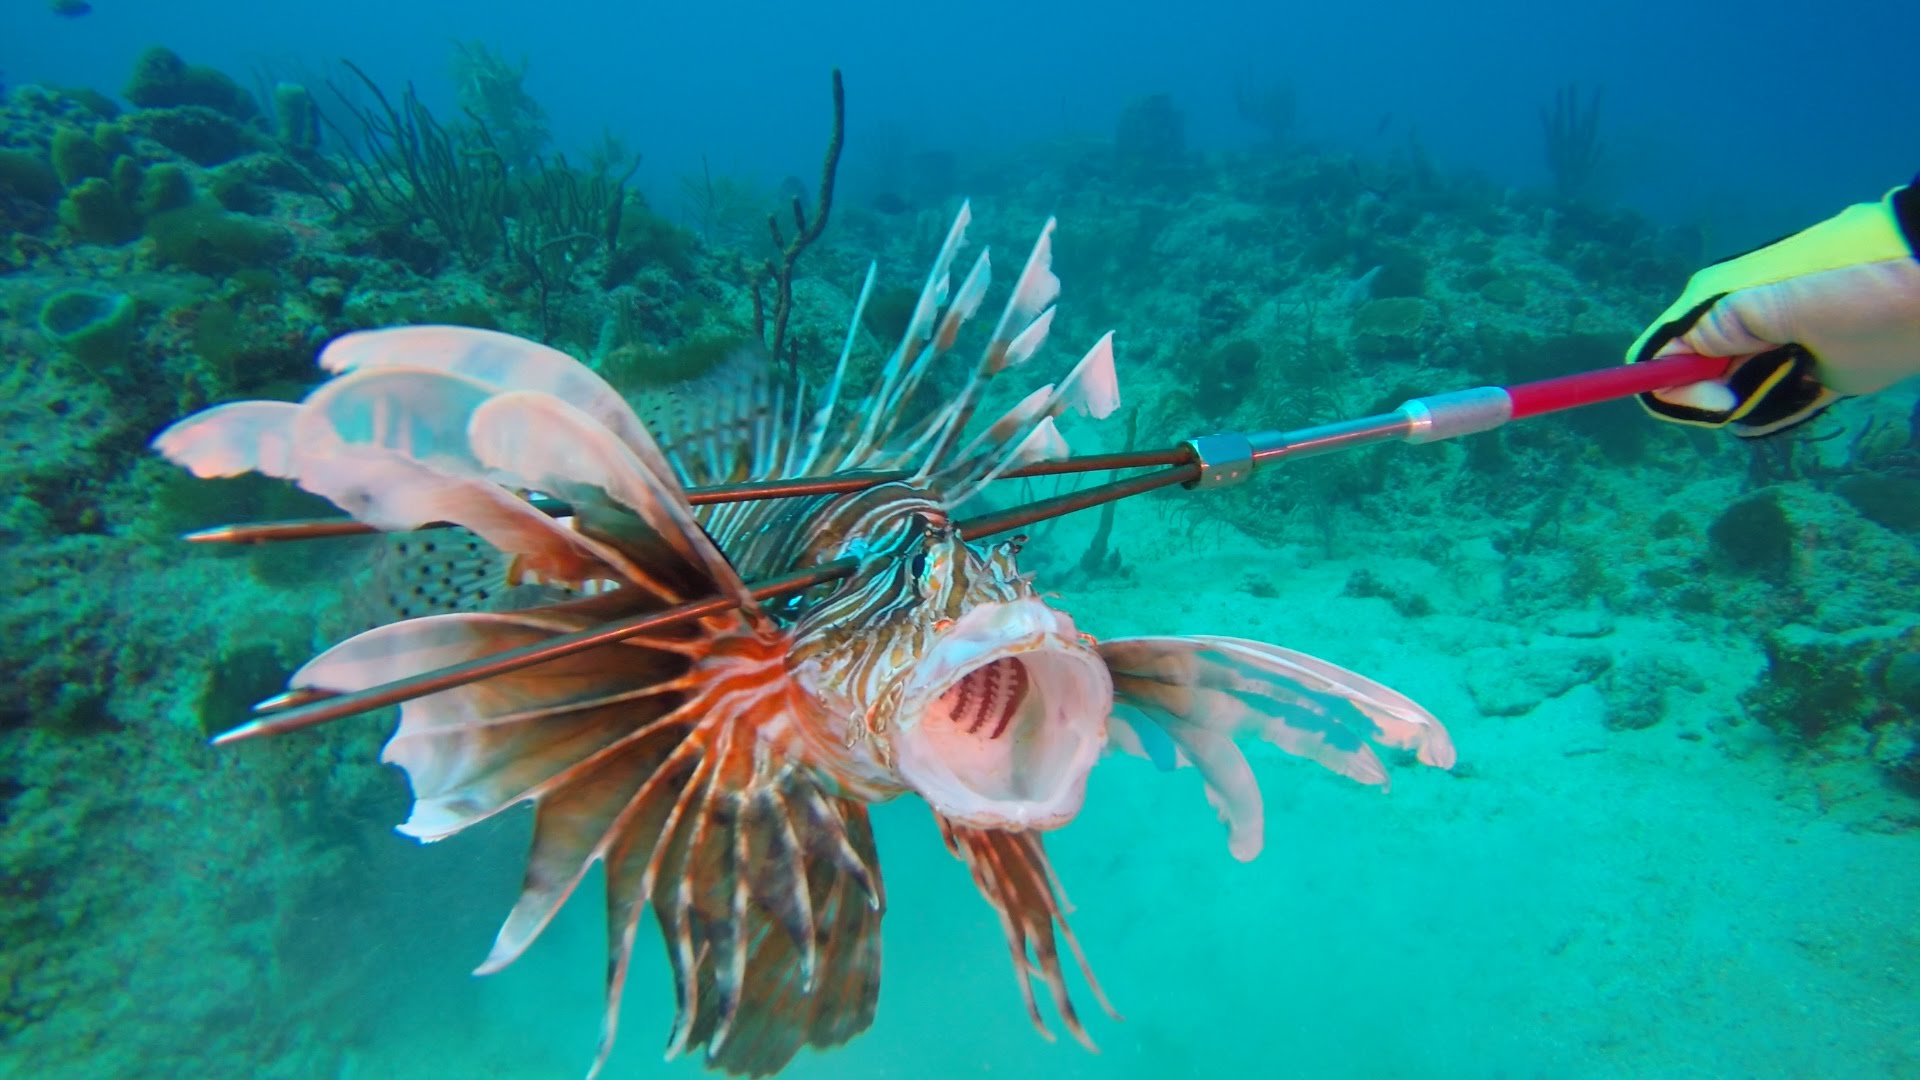 Spearing Lionfish: GoPro: SRP: Ft. Lauderdale - YouTube